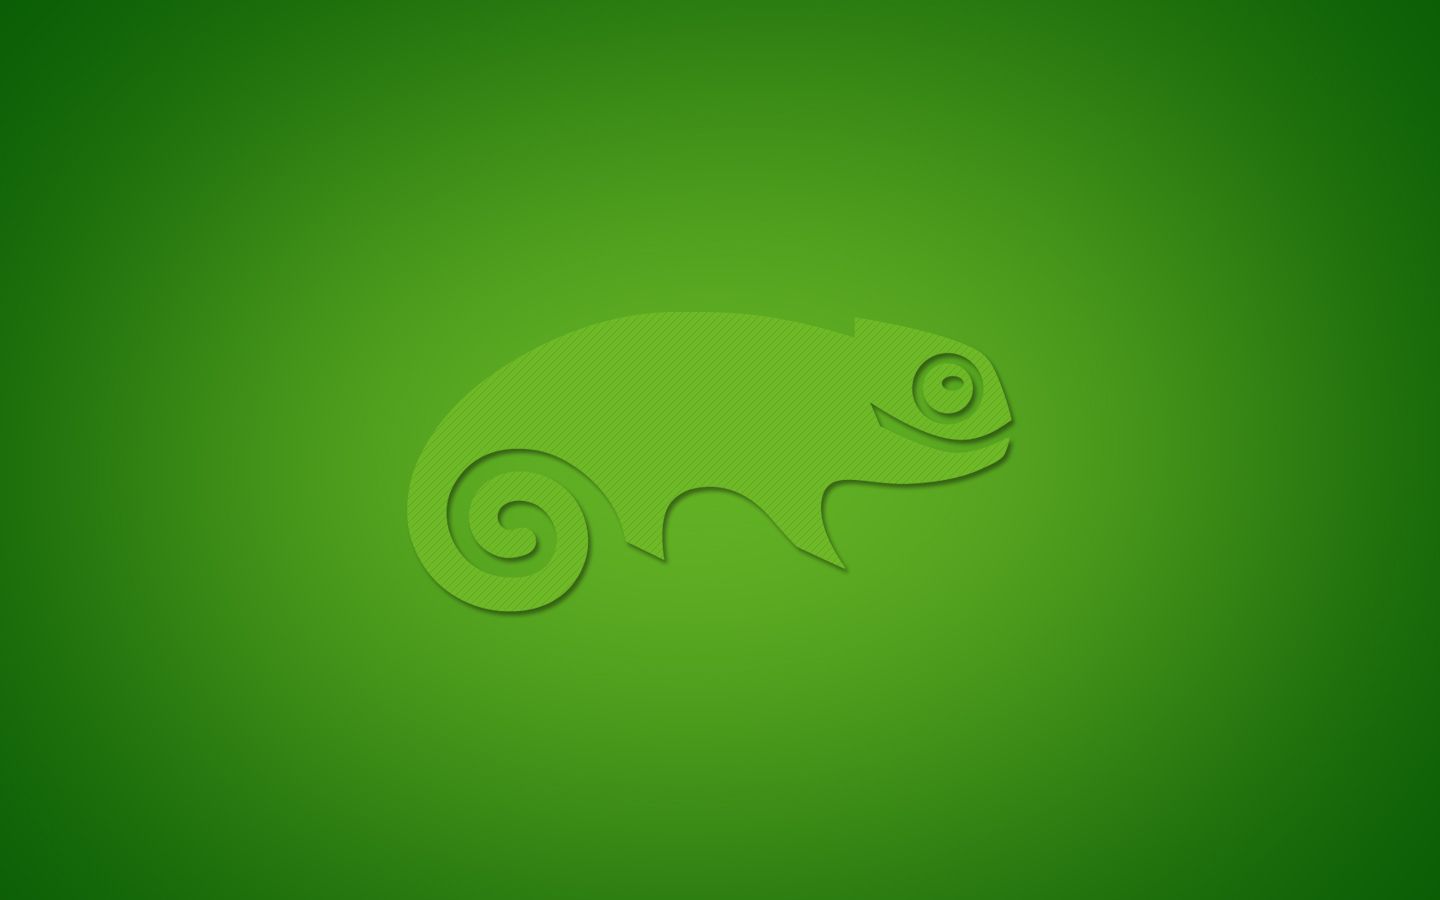 Opensuse Wallpaper Linux